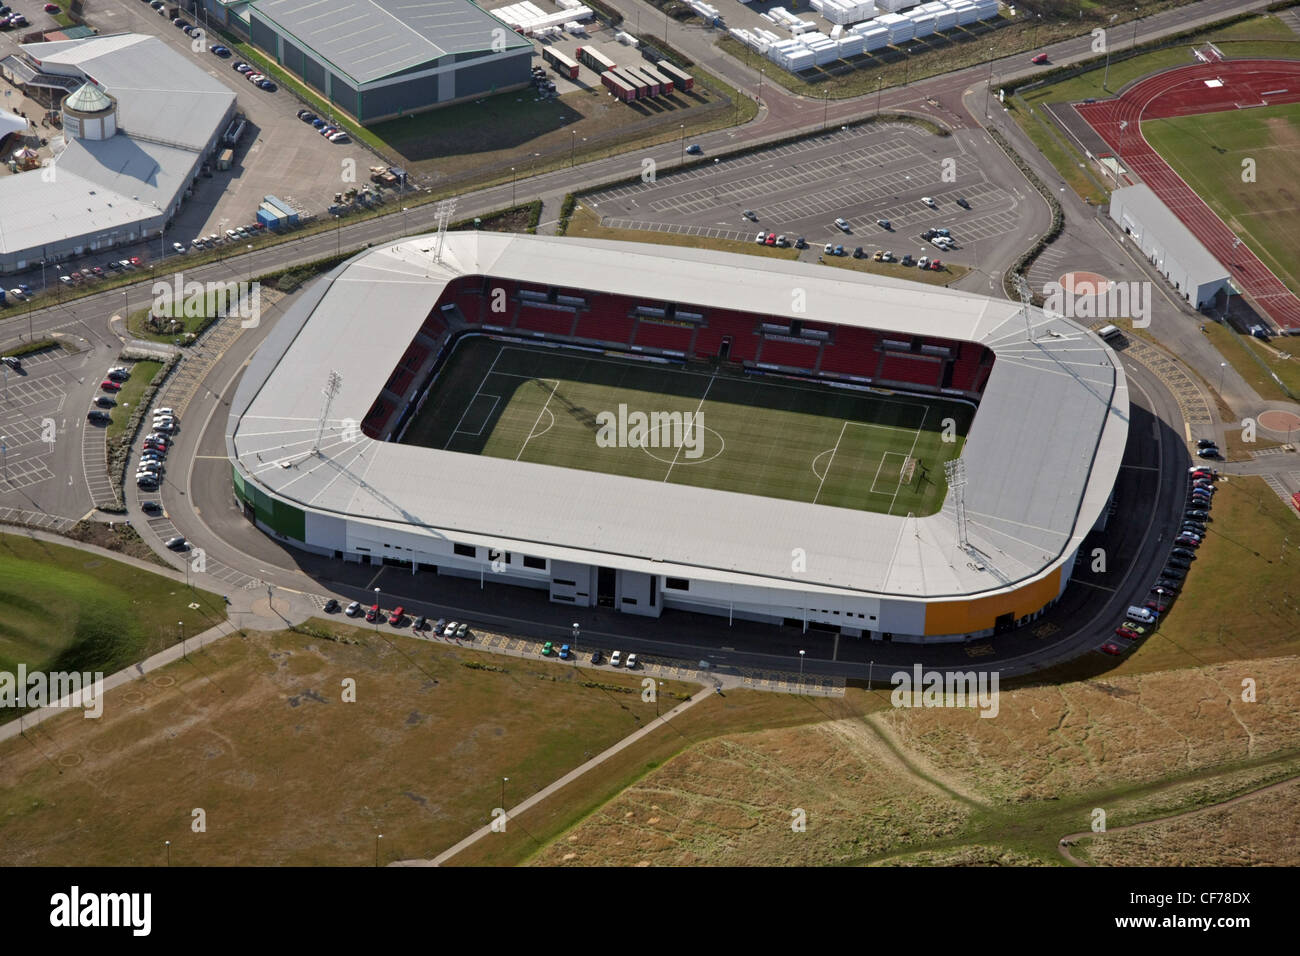 aerial view of Doncaster Rovers football ground - The Eco-Power Stadium Stock Photo